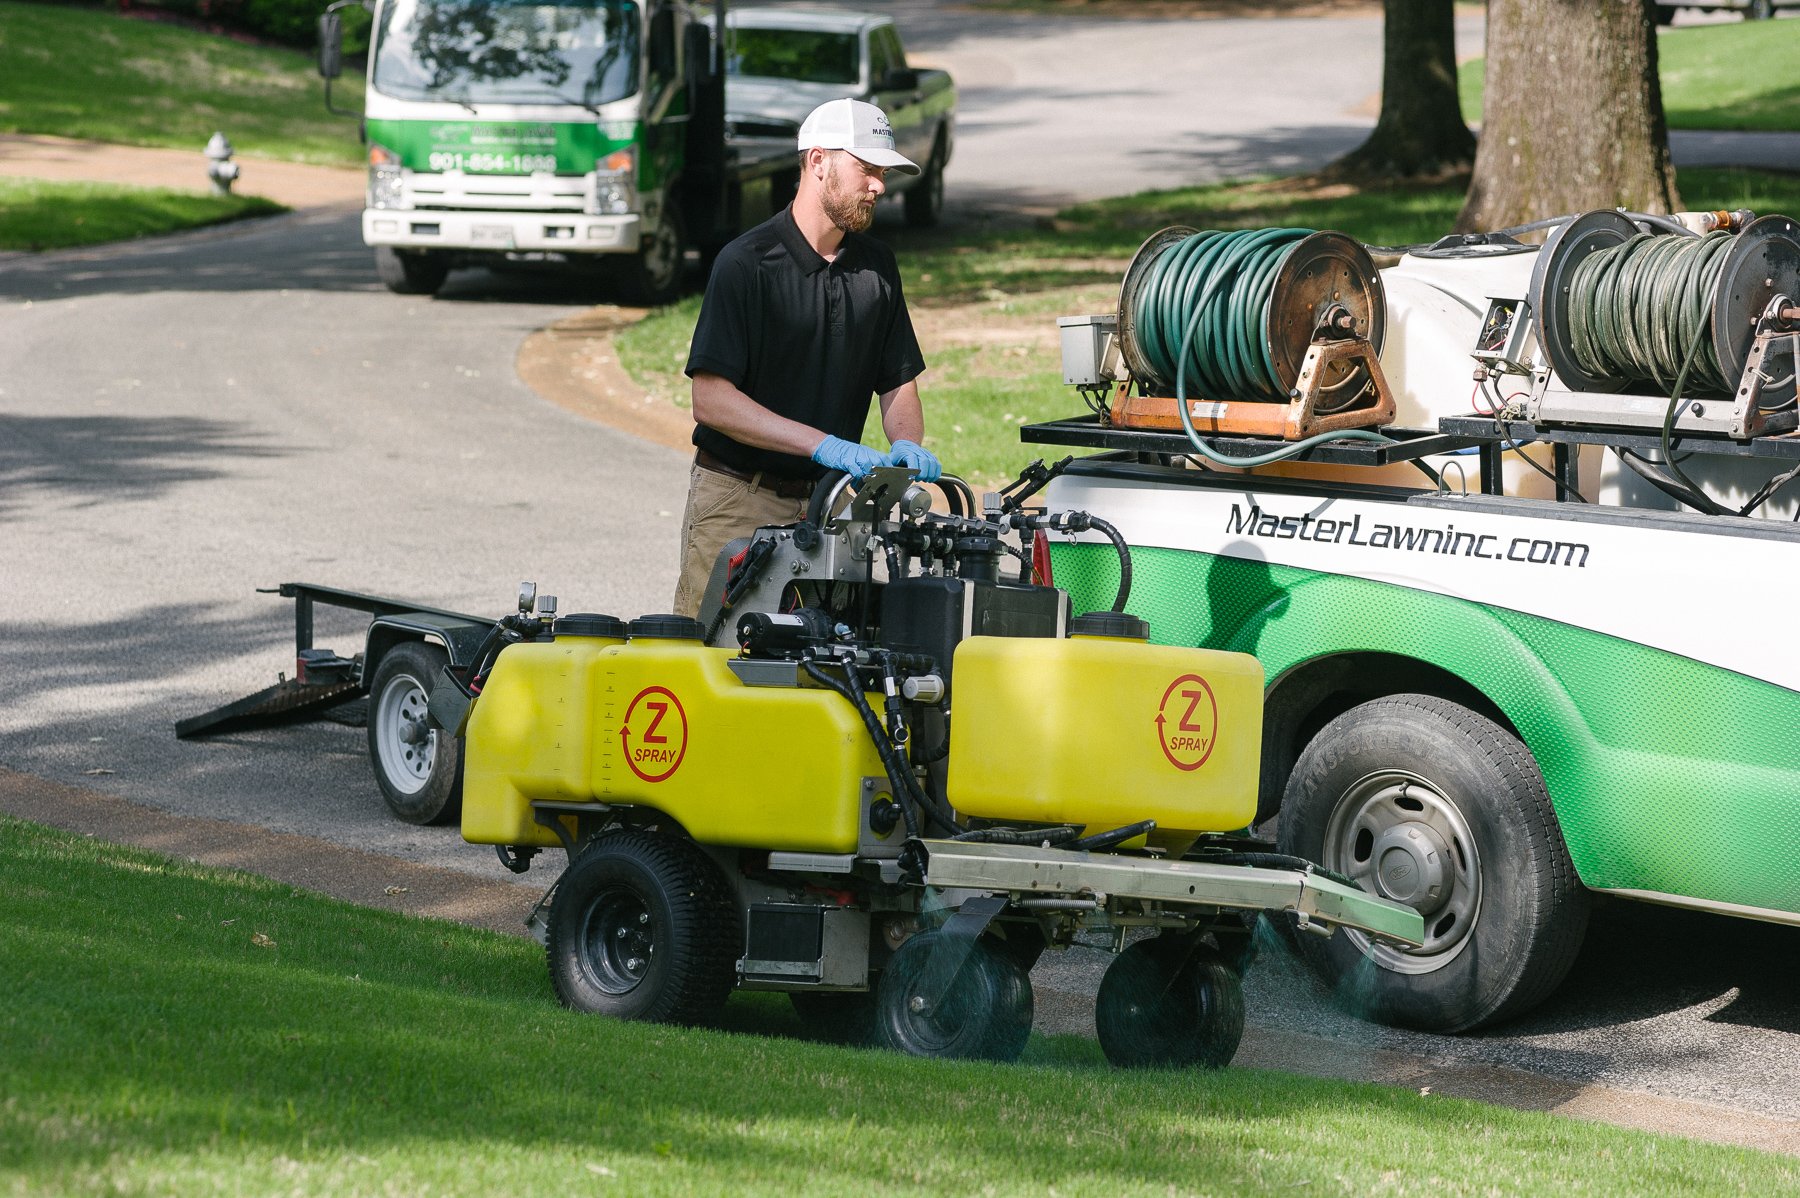 Master Lawn lawn care technician spraying lawn in Olive Branch, MS